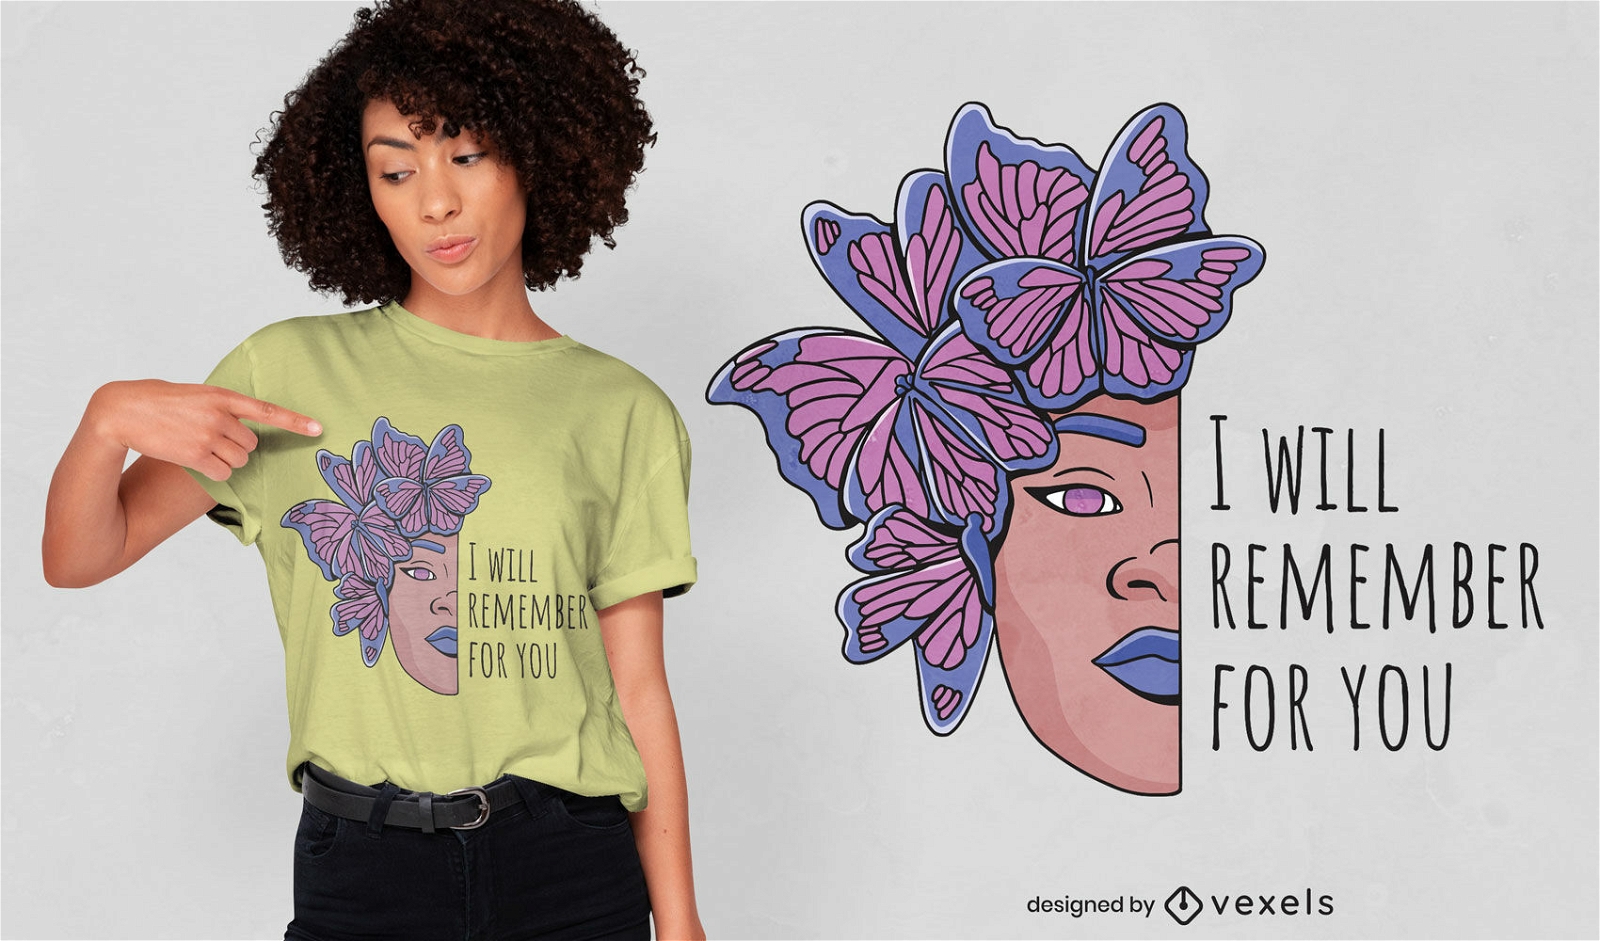 Lovely I will remember for you quote t-shirt design